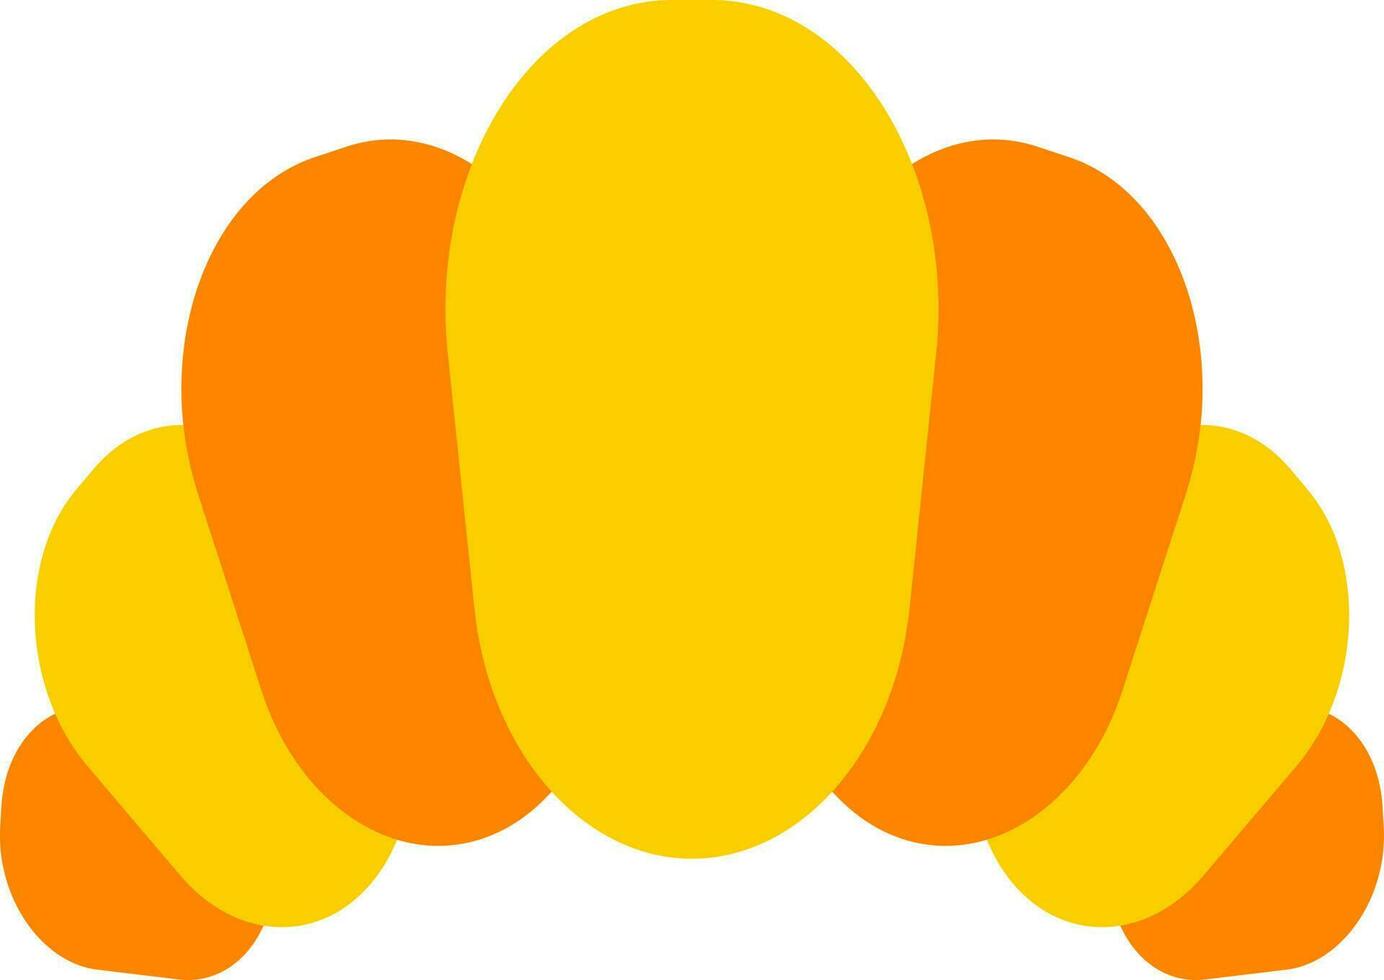 Croissant icon in yellow and orange color. vector